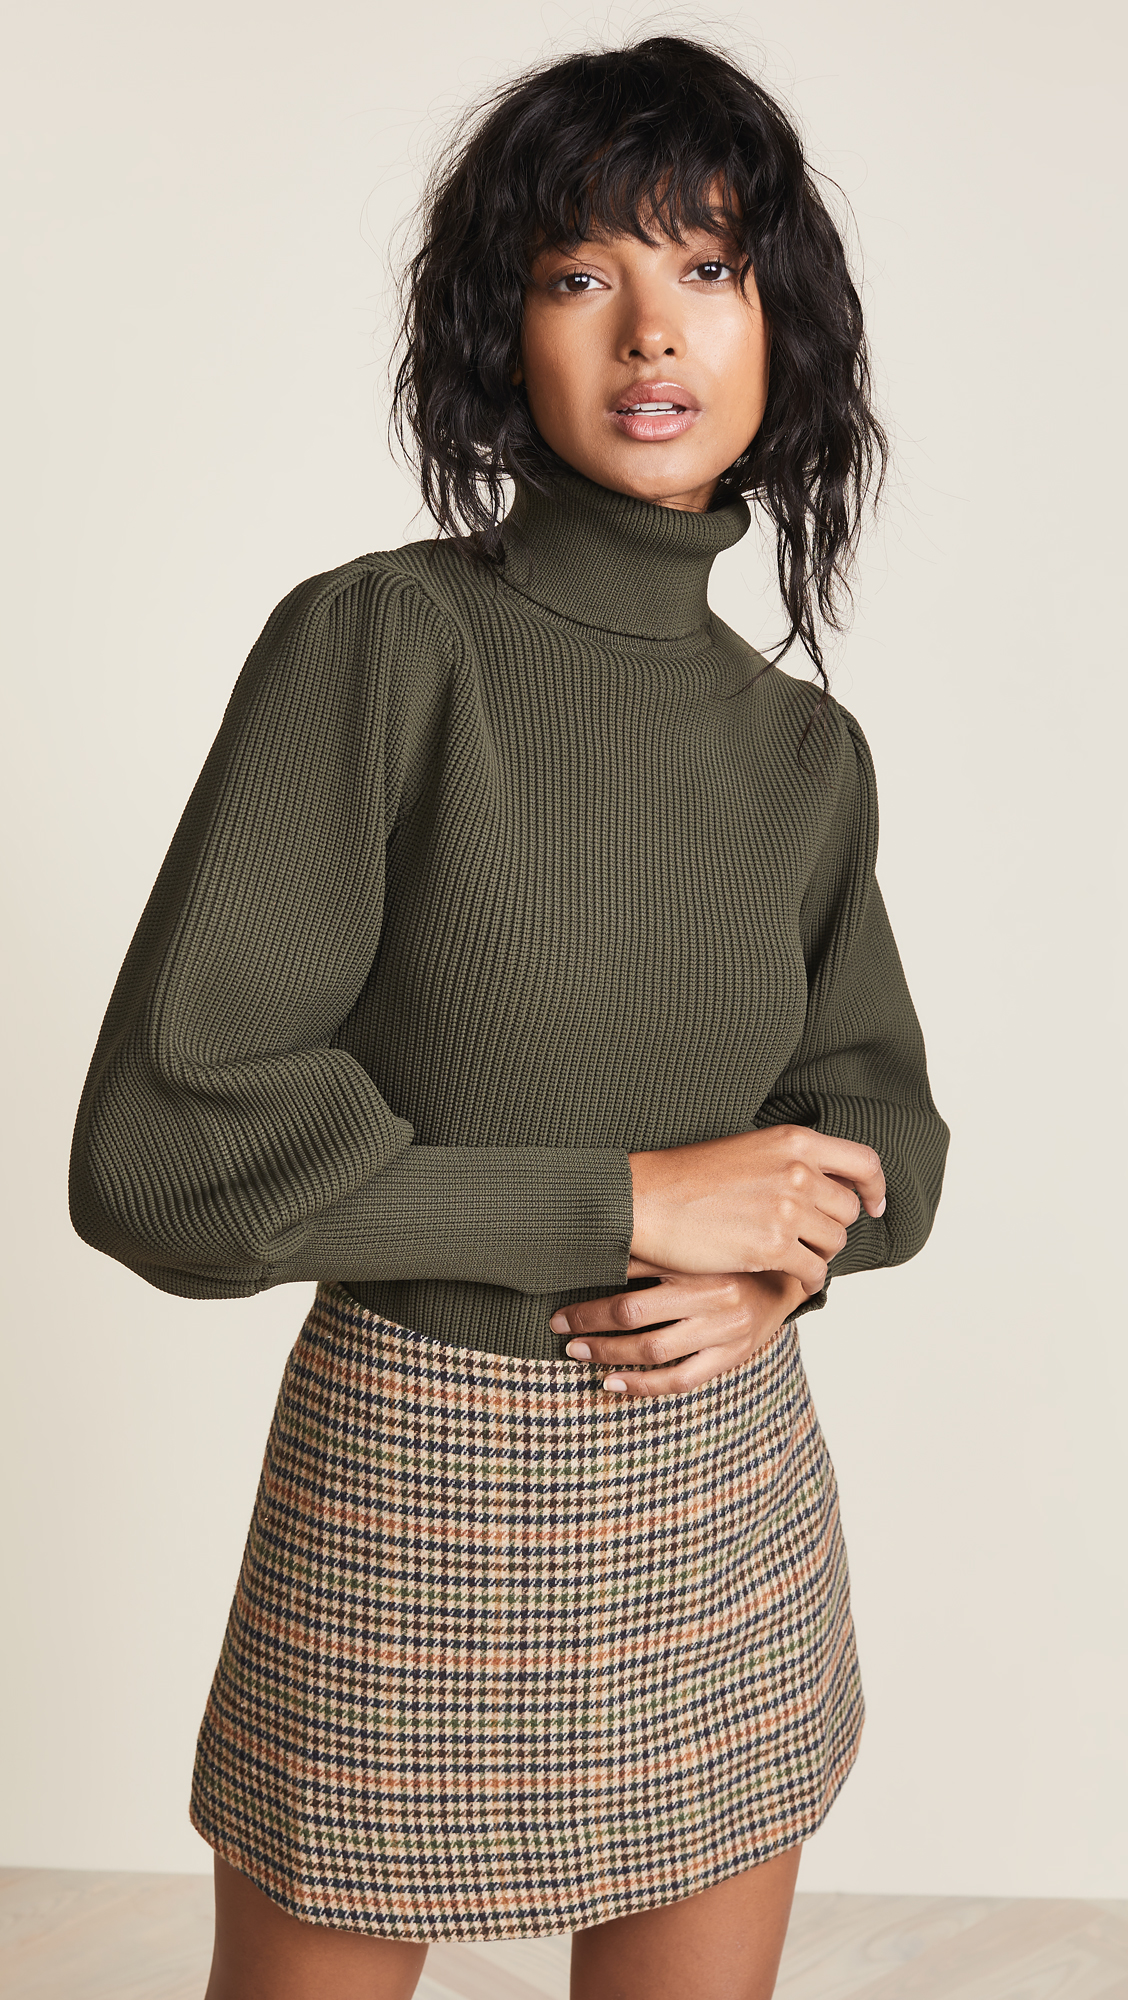 These 15 Green Sweater Outfits Will ...